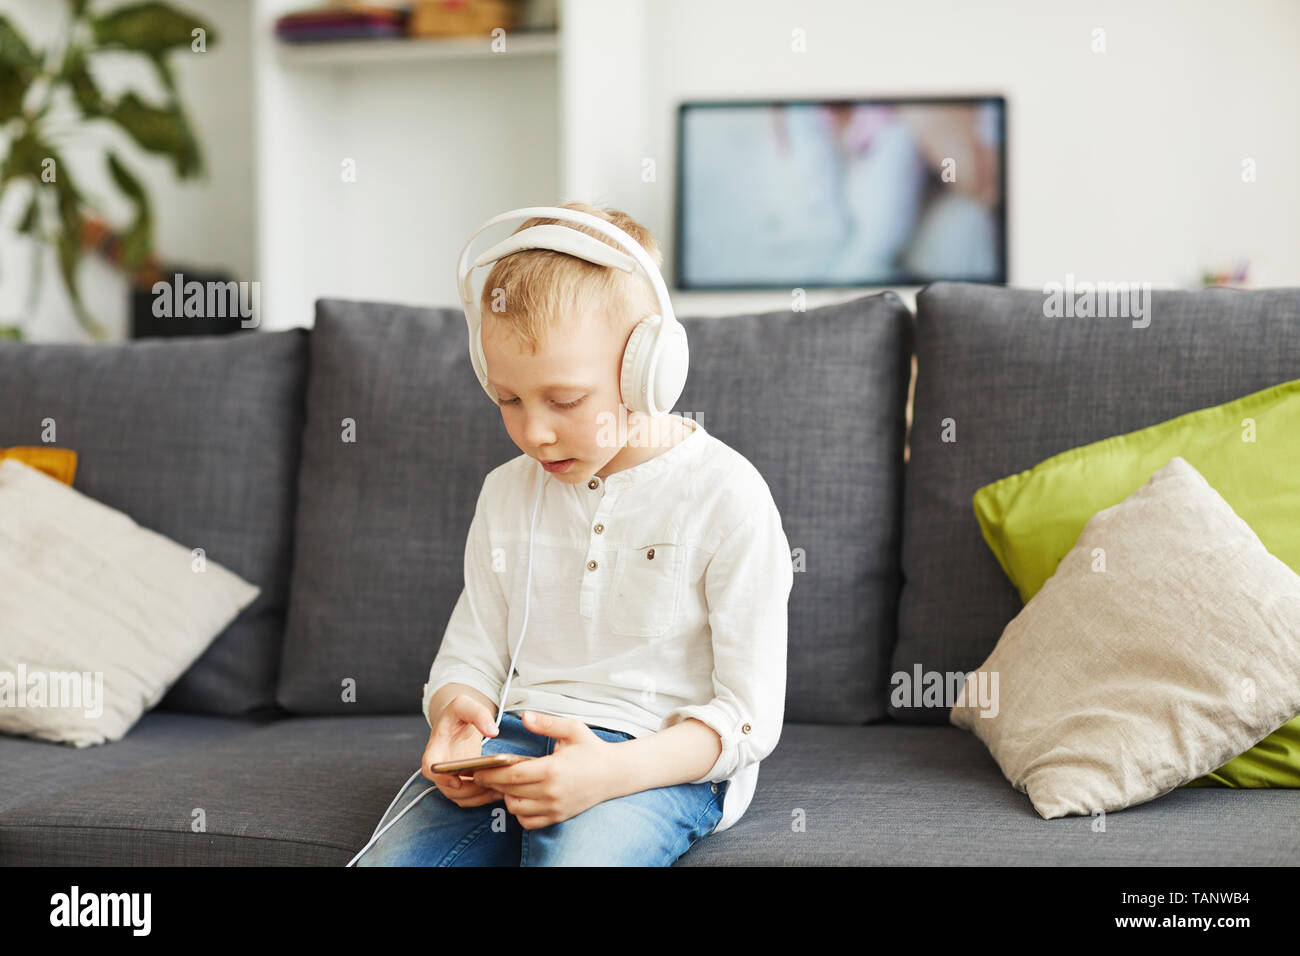 Content curious technology-addicted little boy in headphones sitting on sofa and playing game on phone Stock Photo